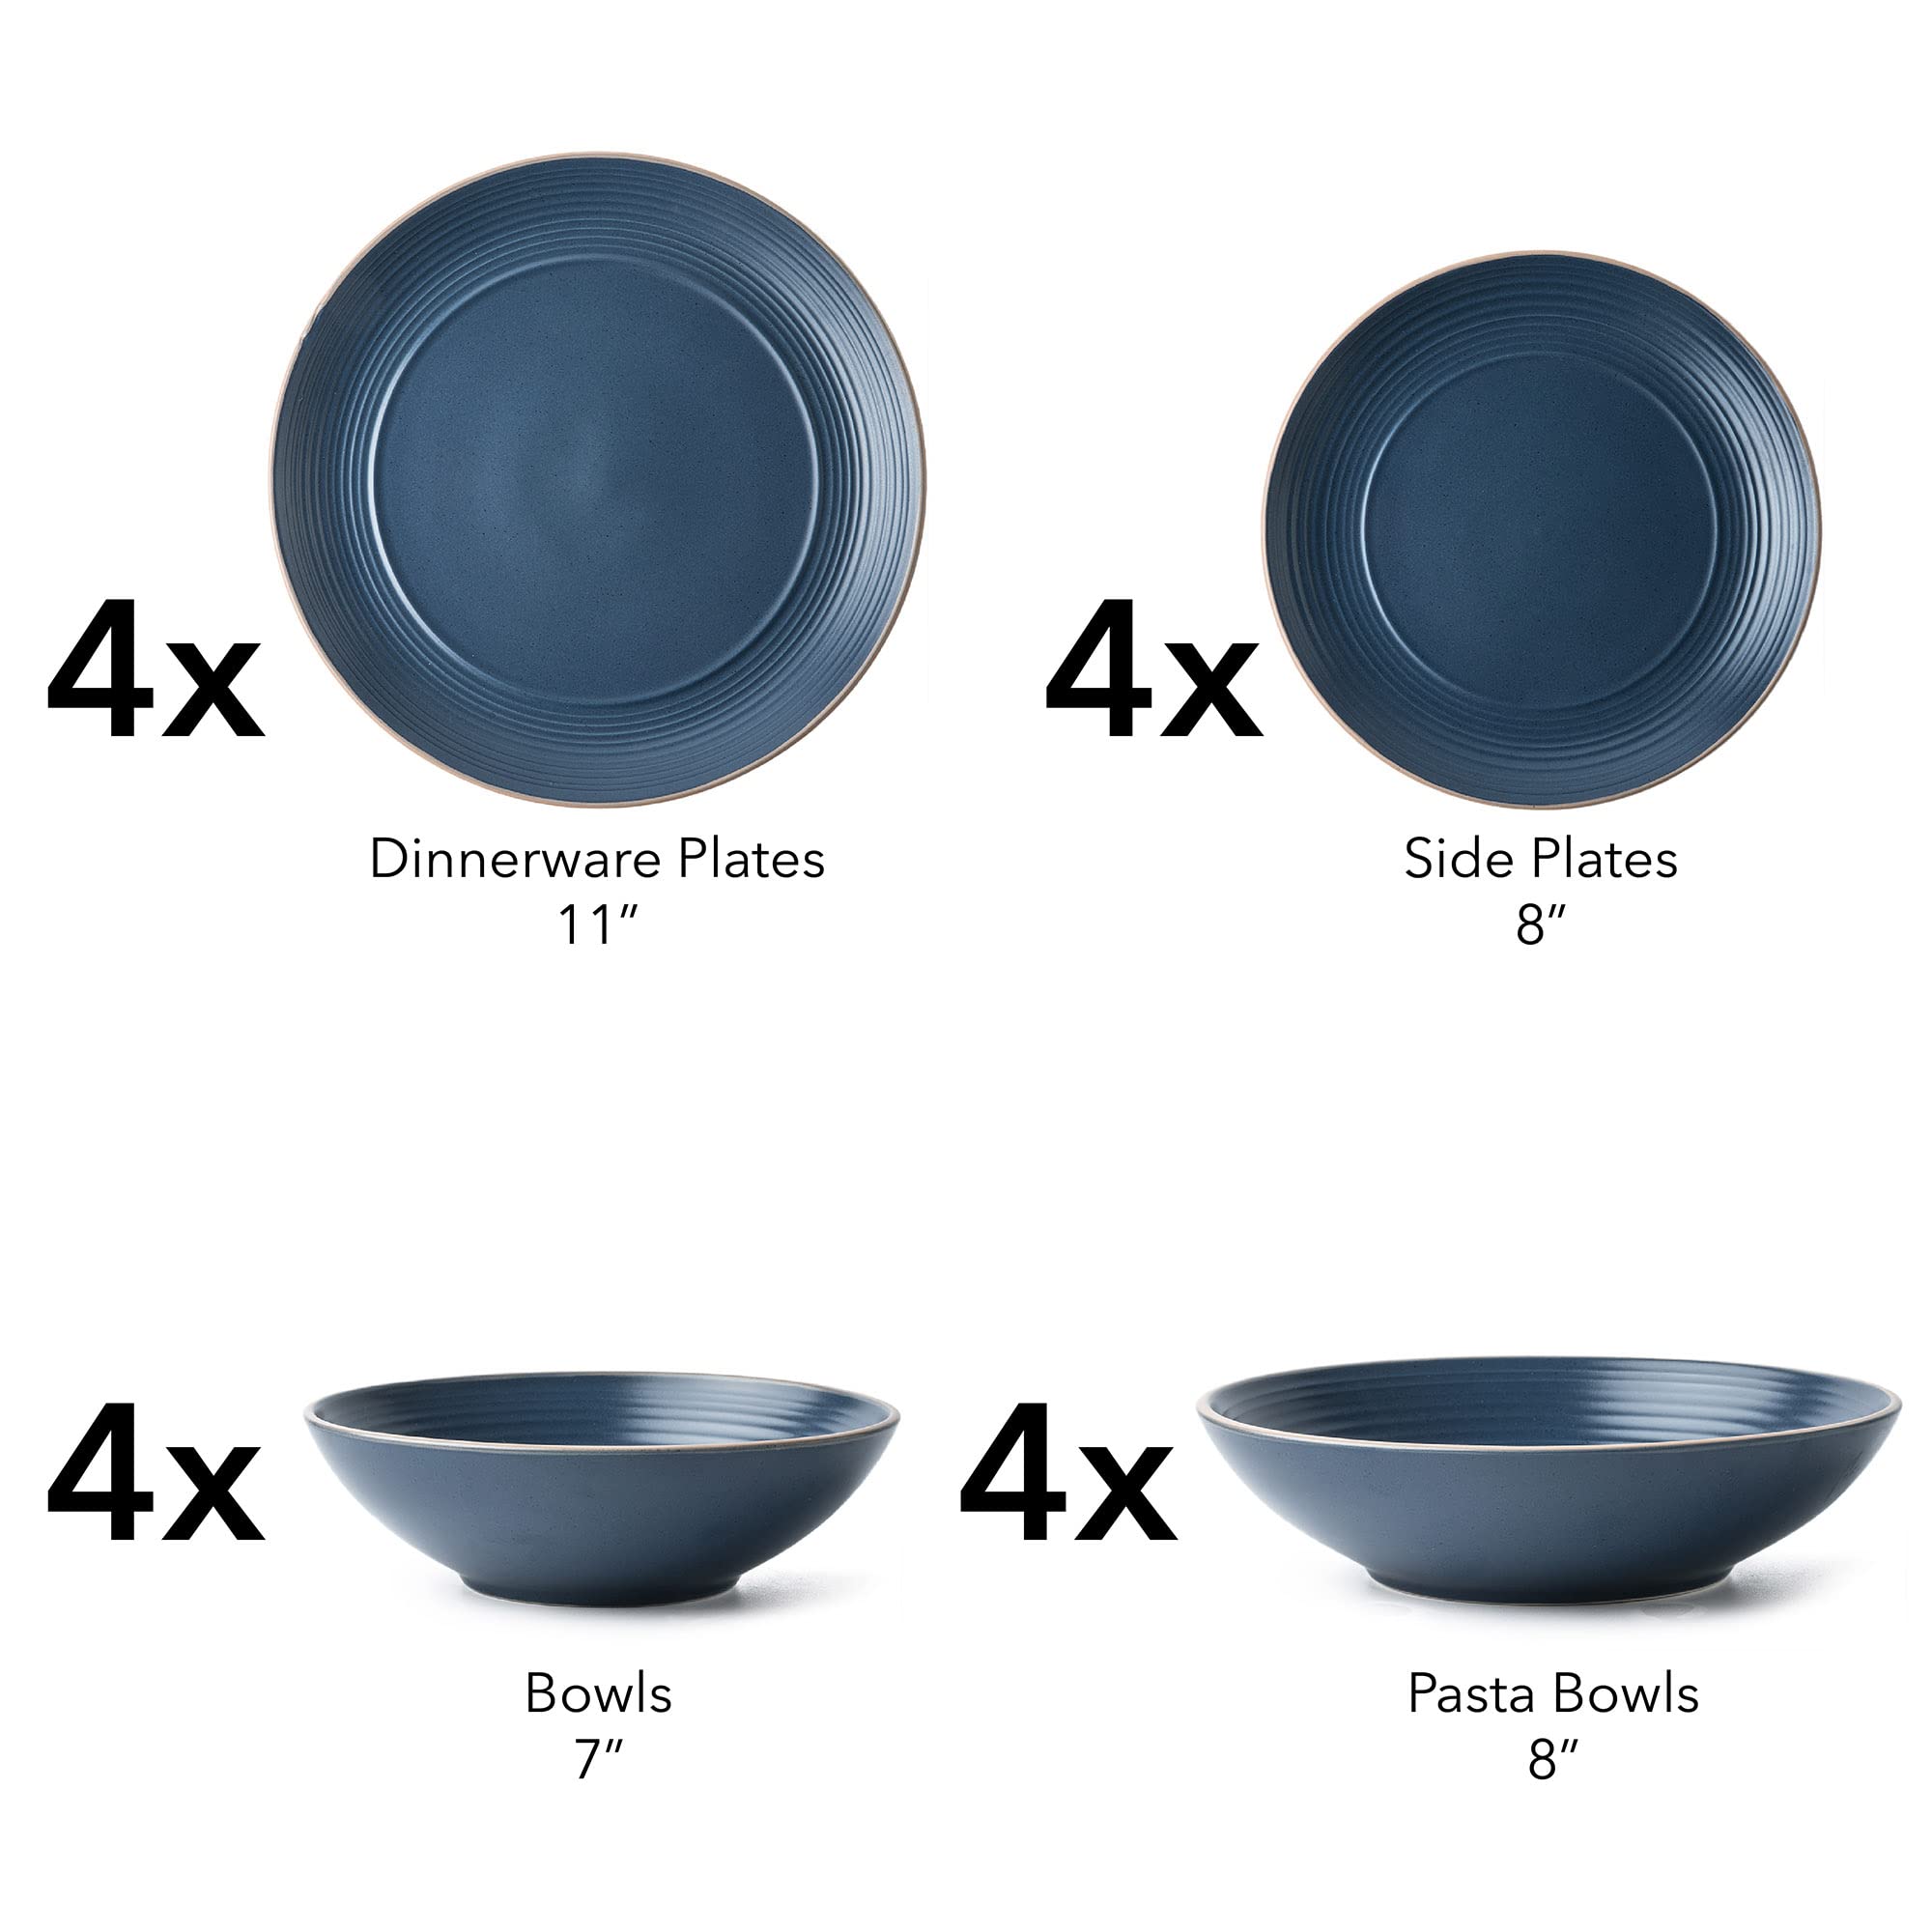 Arora RINGAR Round Stoneware 16pc Double Bowl Dinnerware Set for 4, Dinner Plates, Side Plates, Cereal Bowls, Pasta Bowls - Speckle Matte Blue (420796)